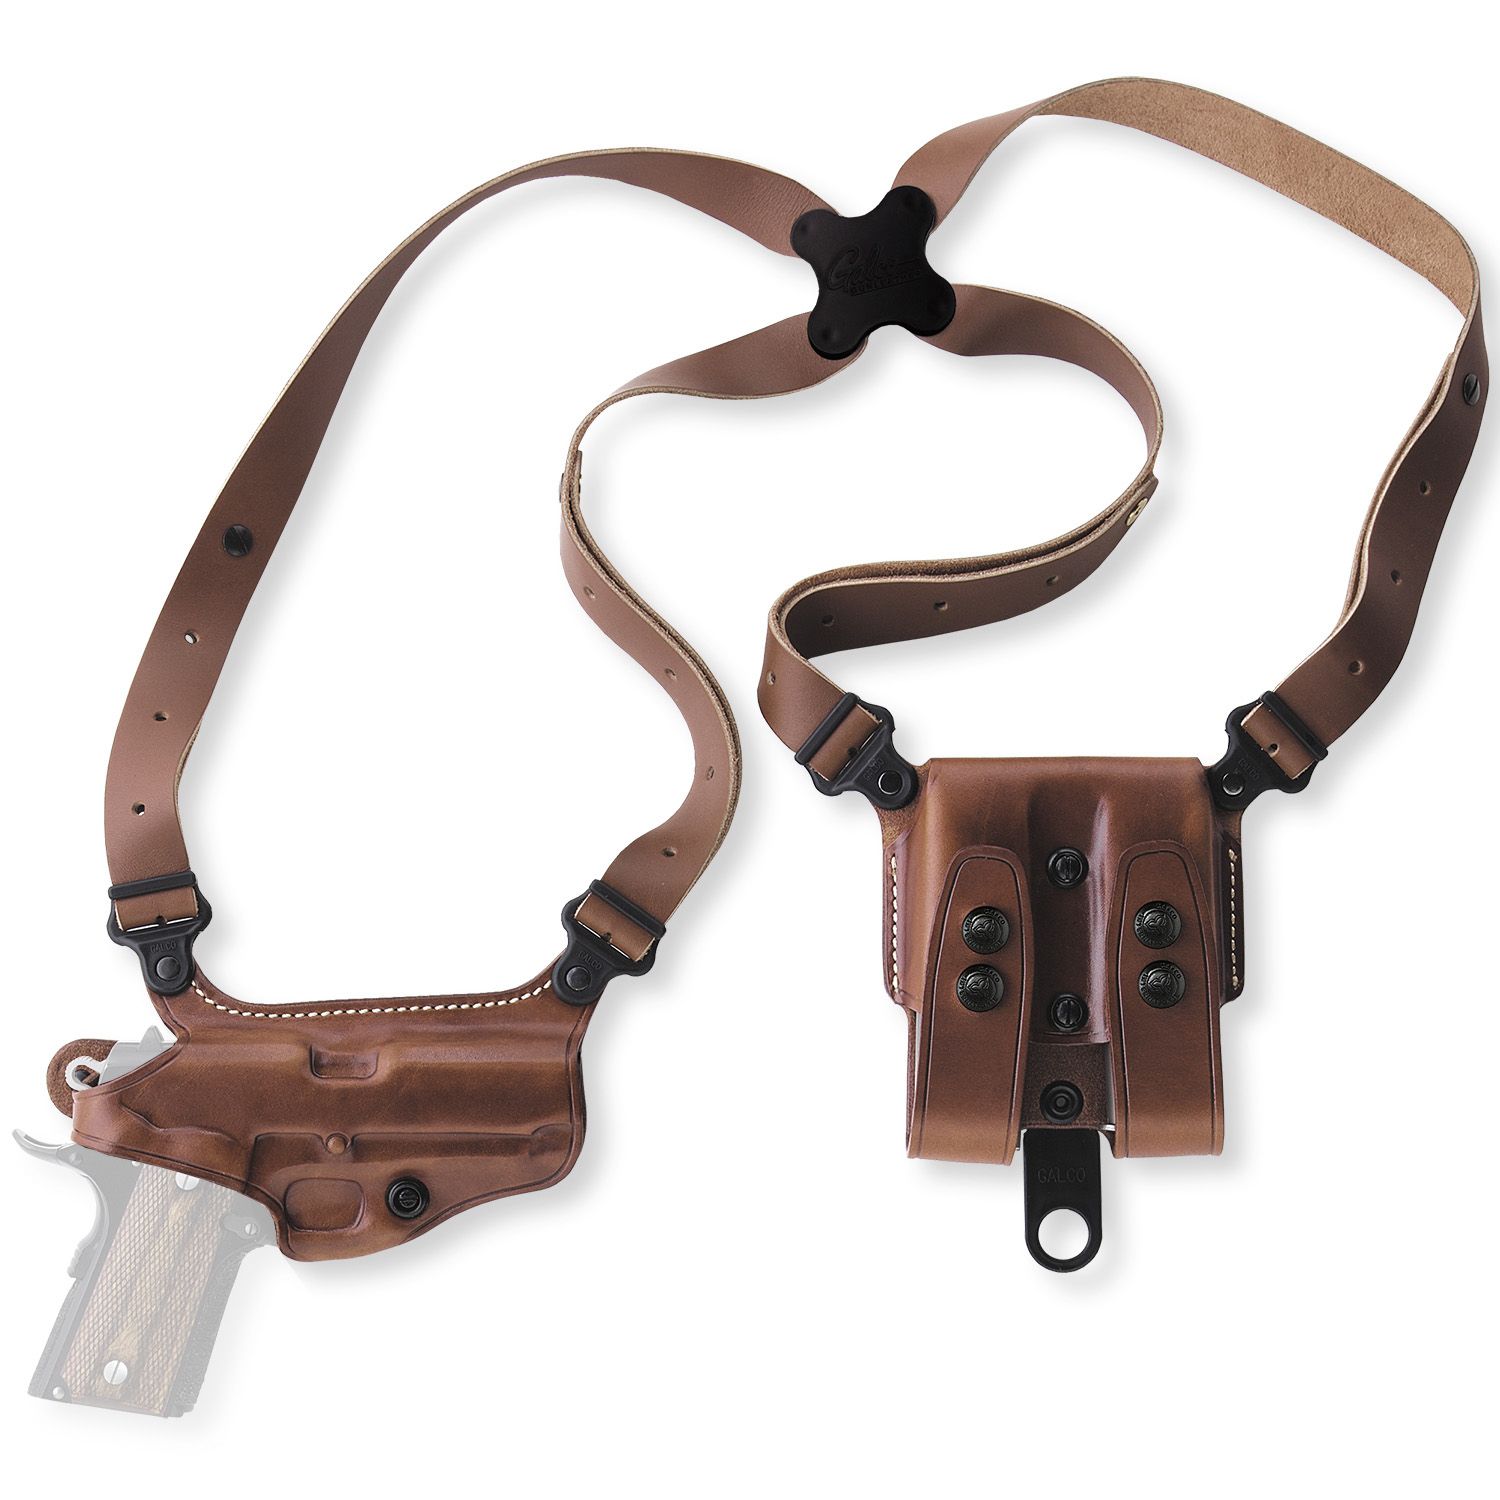 Galco Miami Classic Shoulder Holster System Tan Sig 220/226: MC248